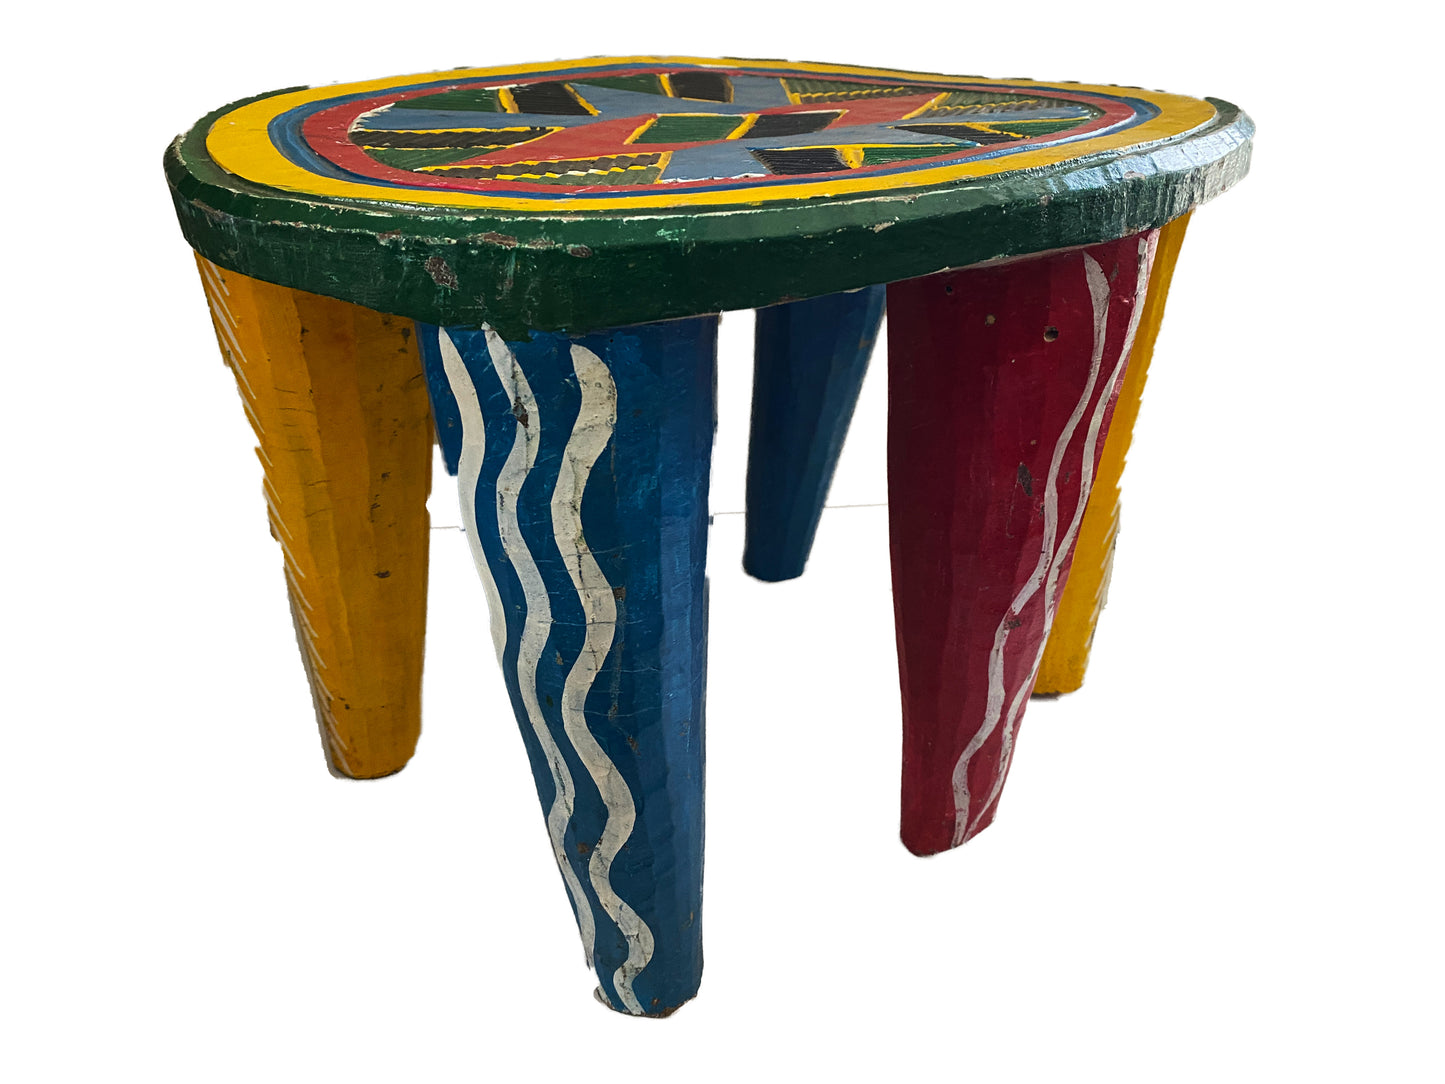 #3660 Superb African LG Colorful Nupe Stool Nigeria 11.75" h